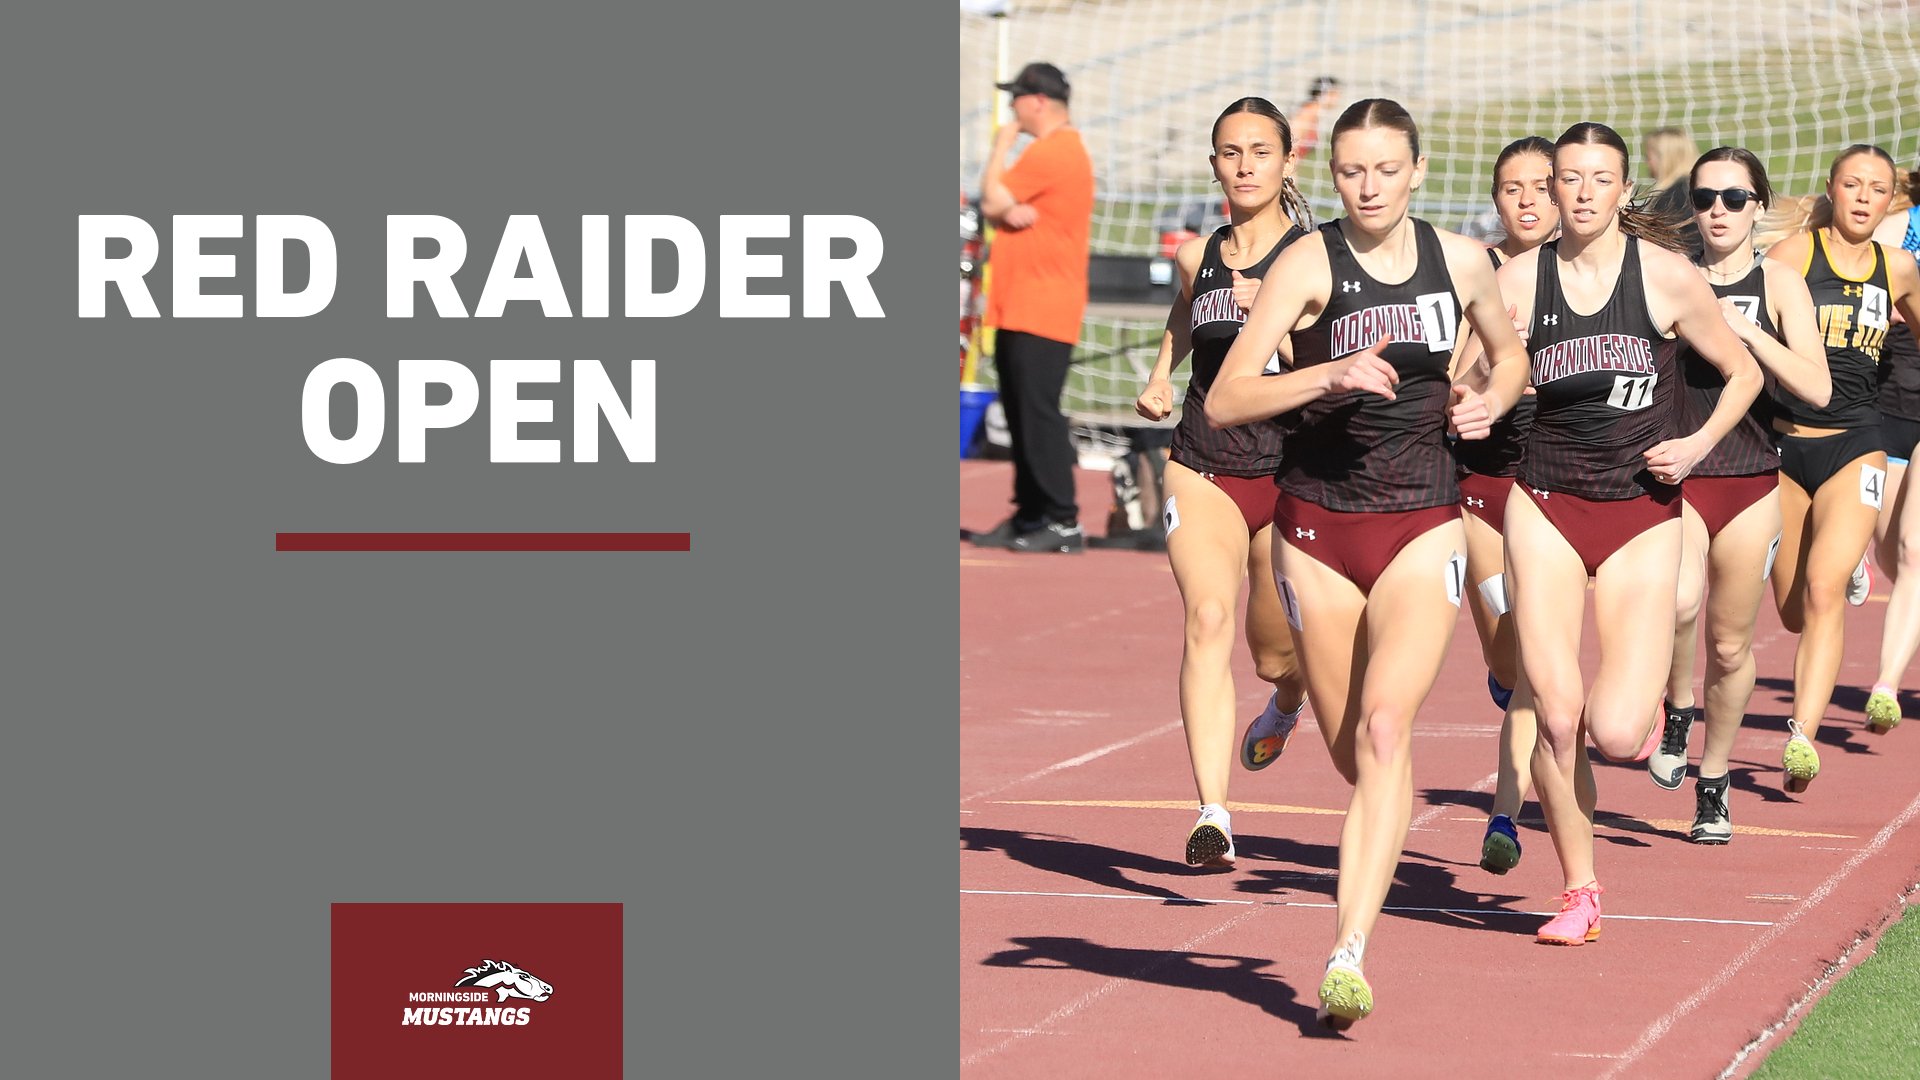 Sporrers, Jenness represent top Mustang finishes at Red Raider Open